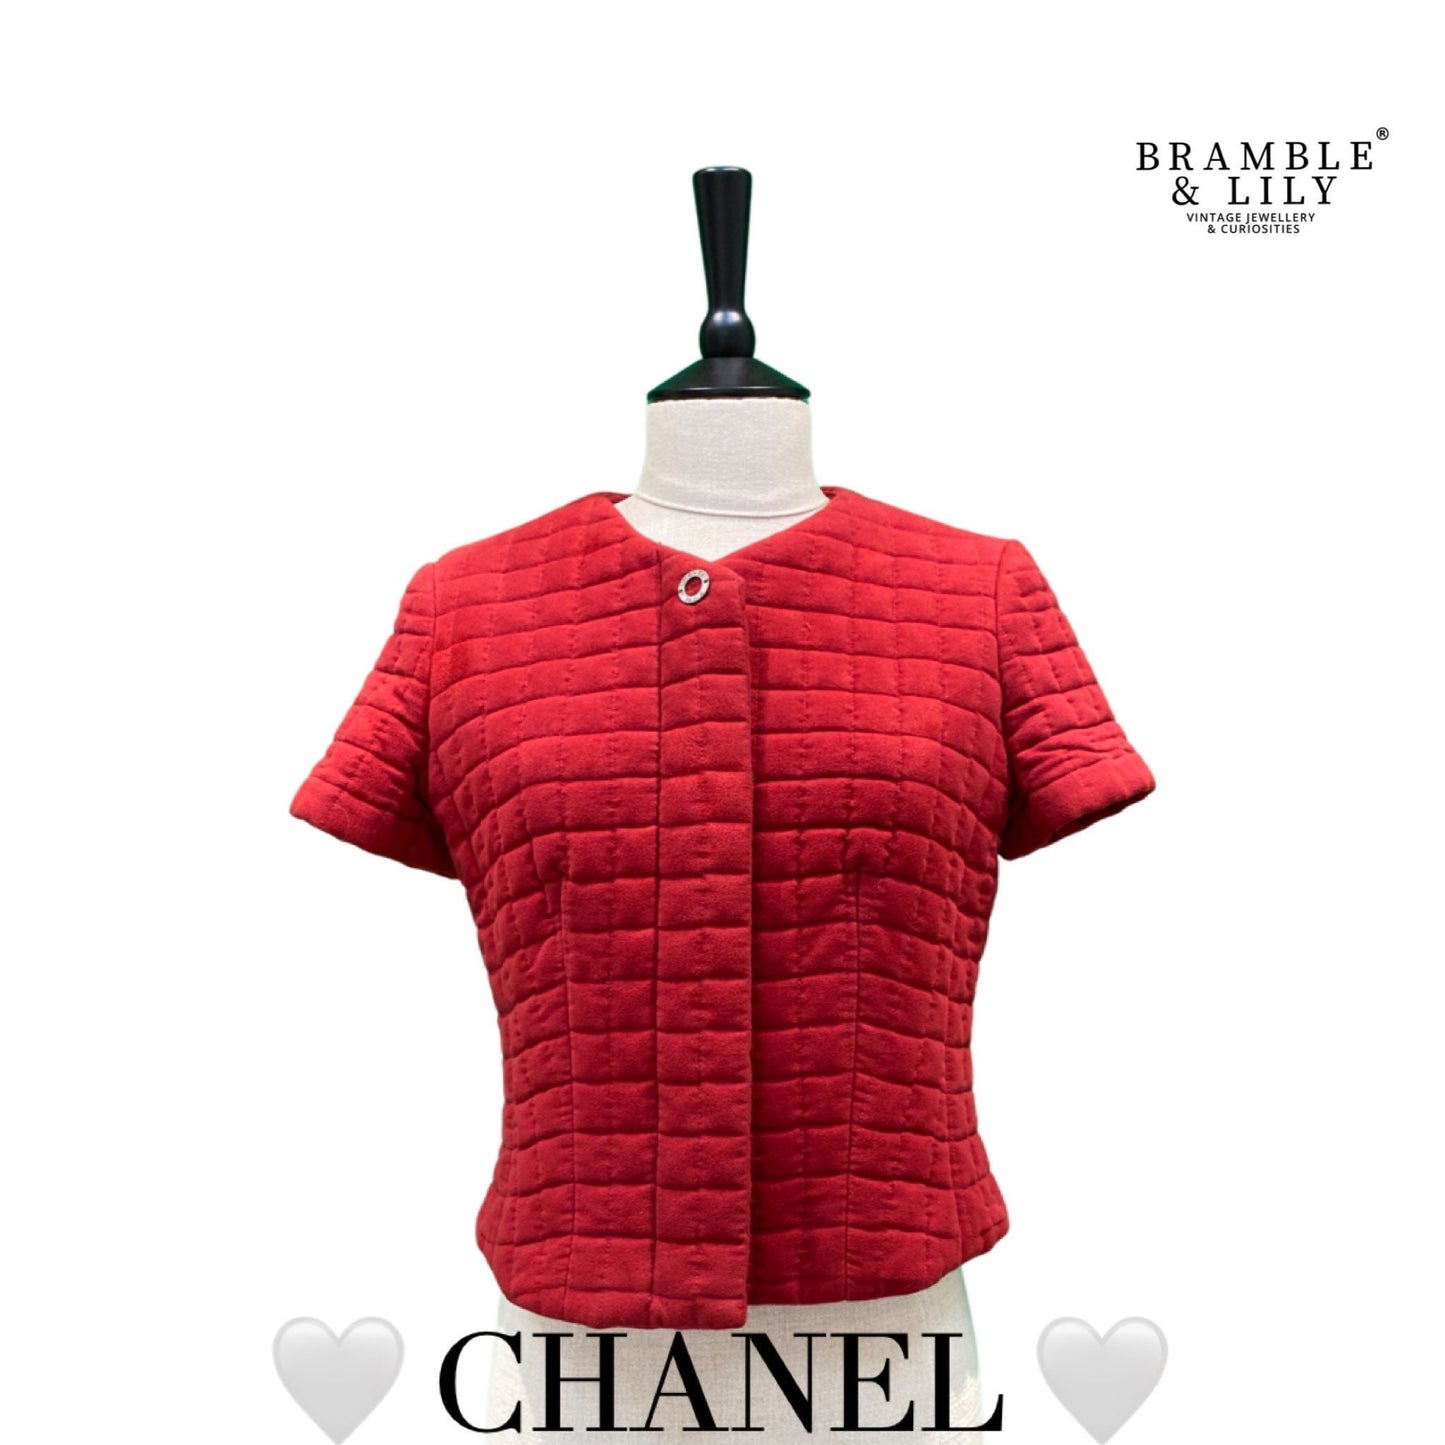 Chanel Identification 2000 Transition Collection Red Padded Short Sleeved Jacket (UK Size 8)